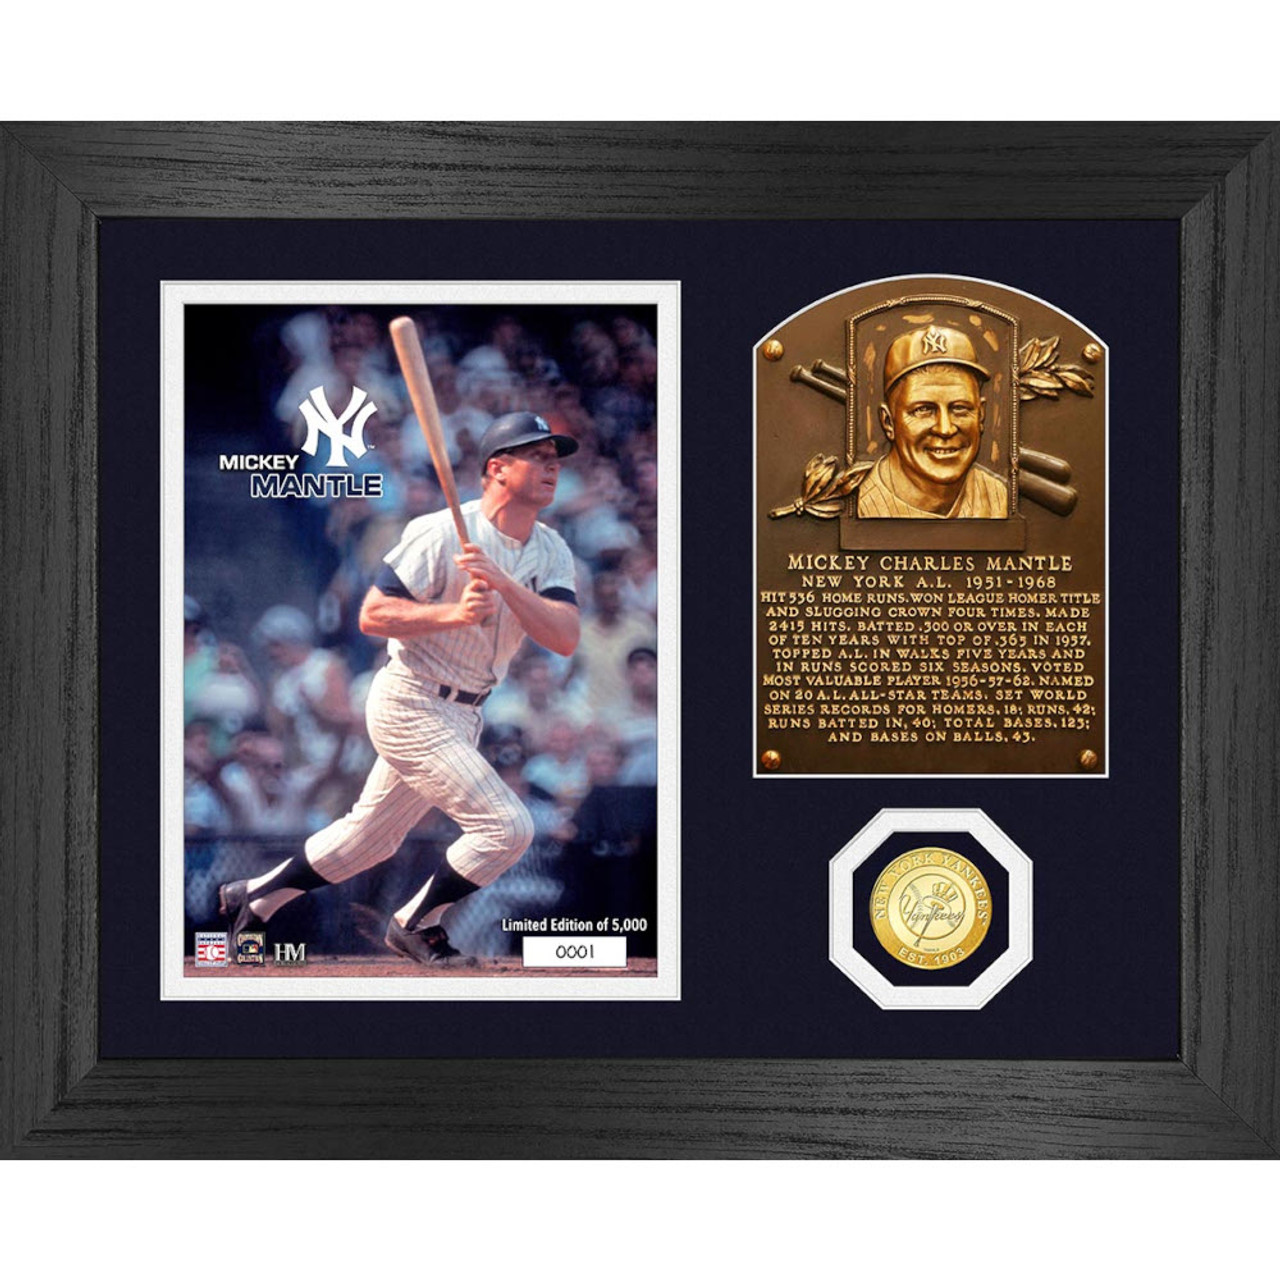 Brooklyn Dodgers JACKIE ROBINSON PEE WEE REESE ROY CAMPANELLA 2 Card  Collector Plaque w/8x10 Photo at 's Sports Collectibles Store